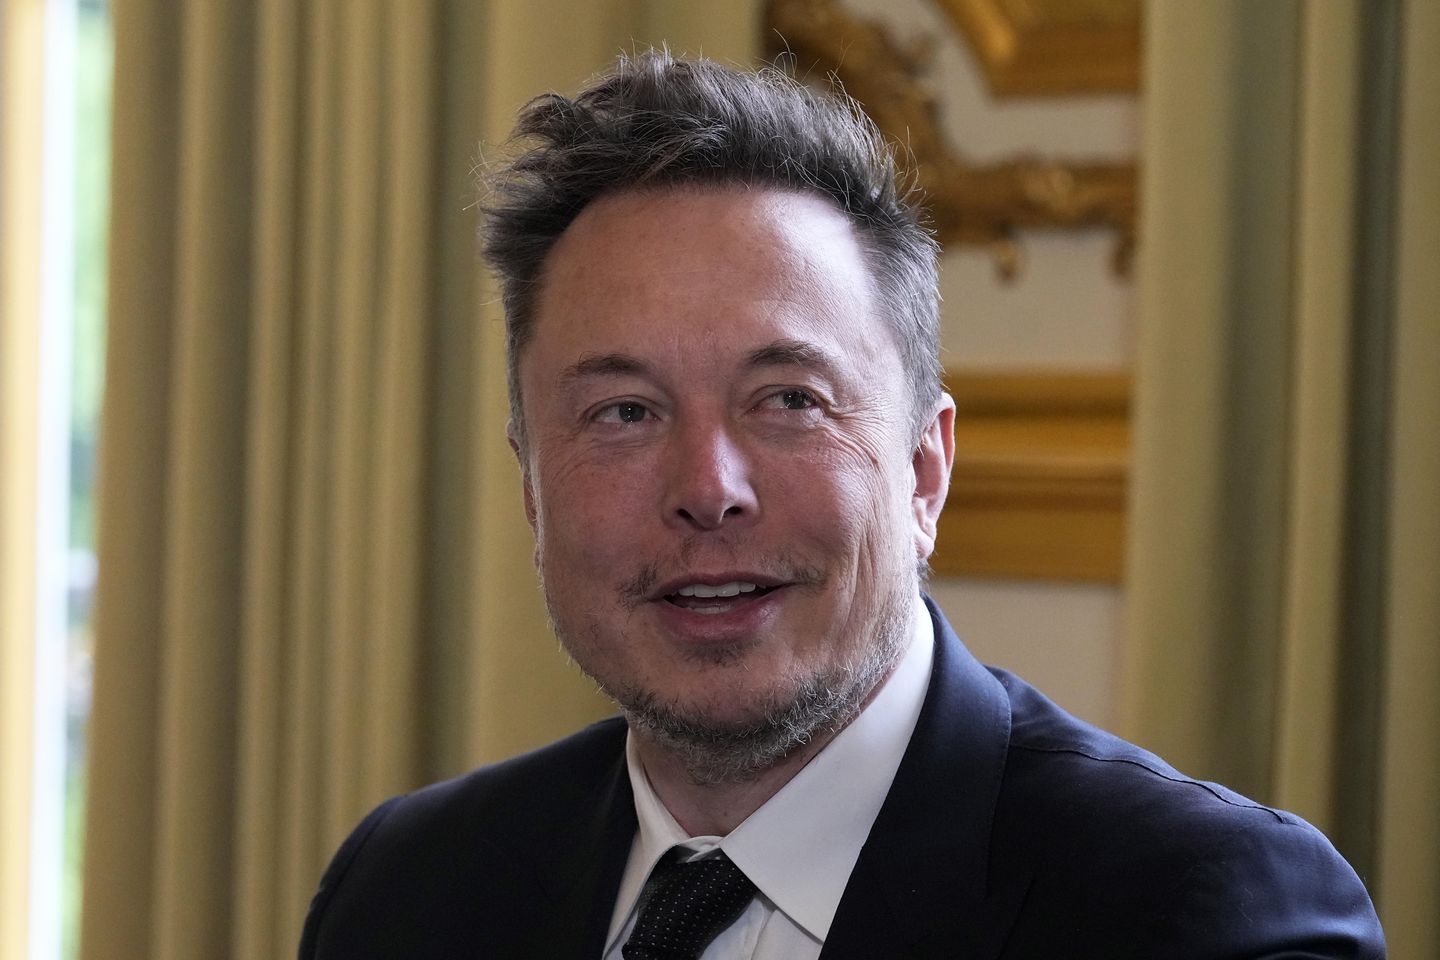 Musk told adviser he would pay rent 'over his dead body'